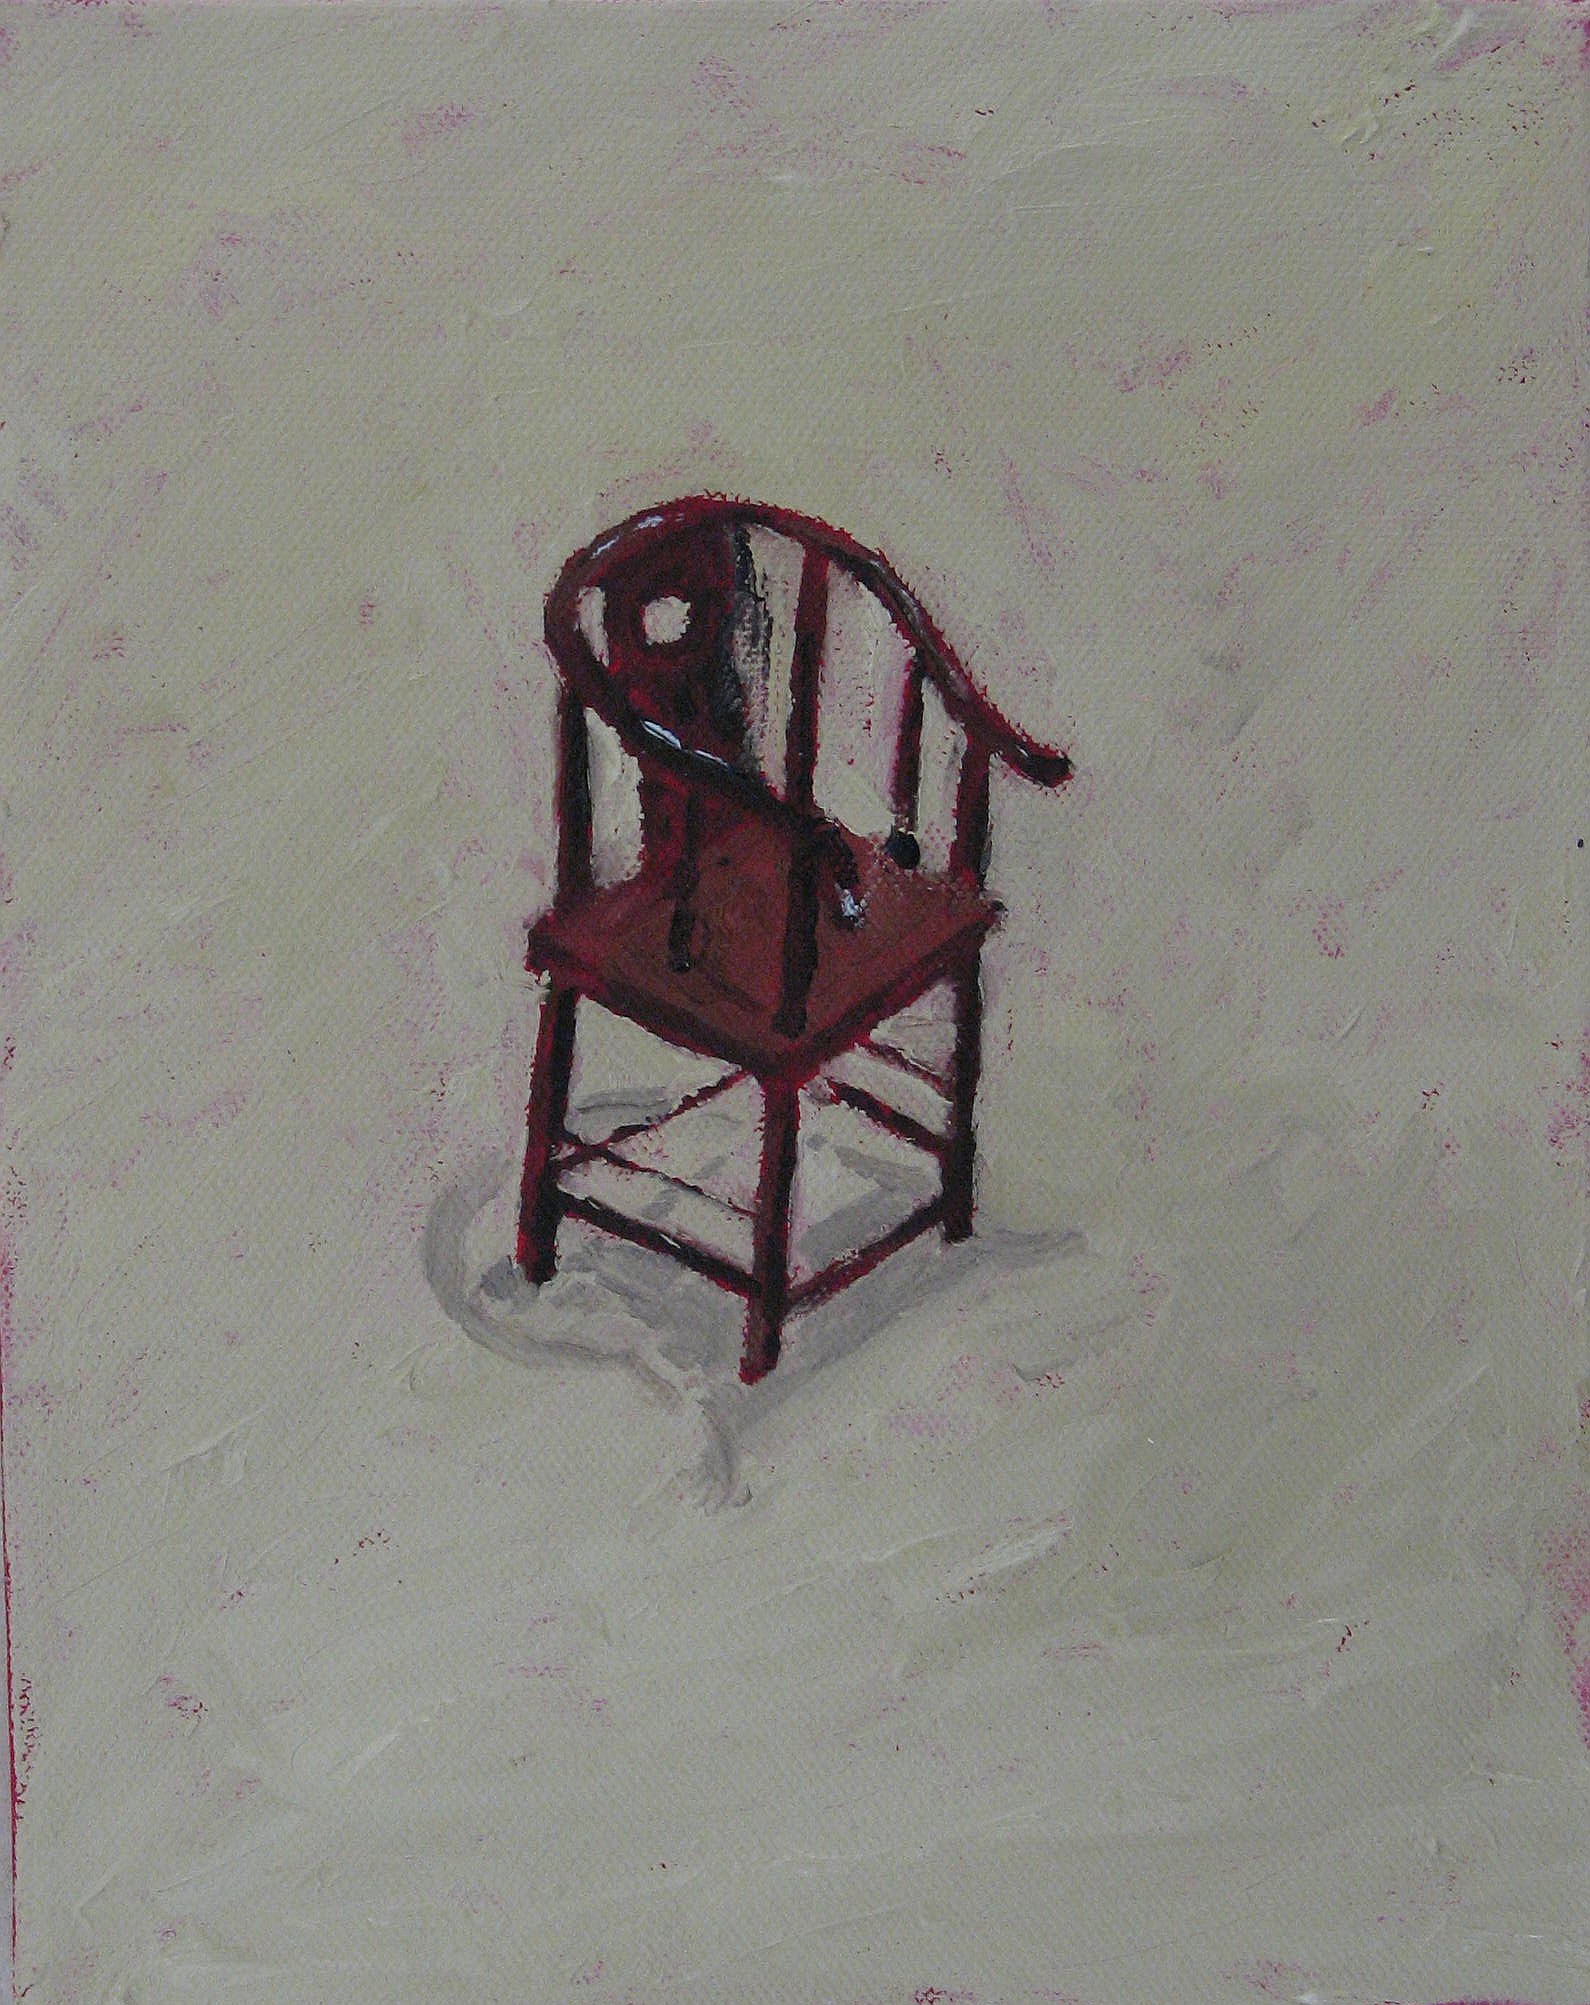 Click the image for a view of: Chair 8. 2008. Oil on canvas. 250 X 200mm